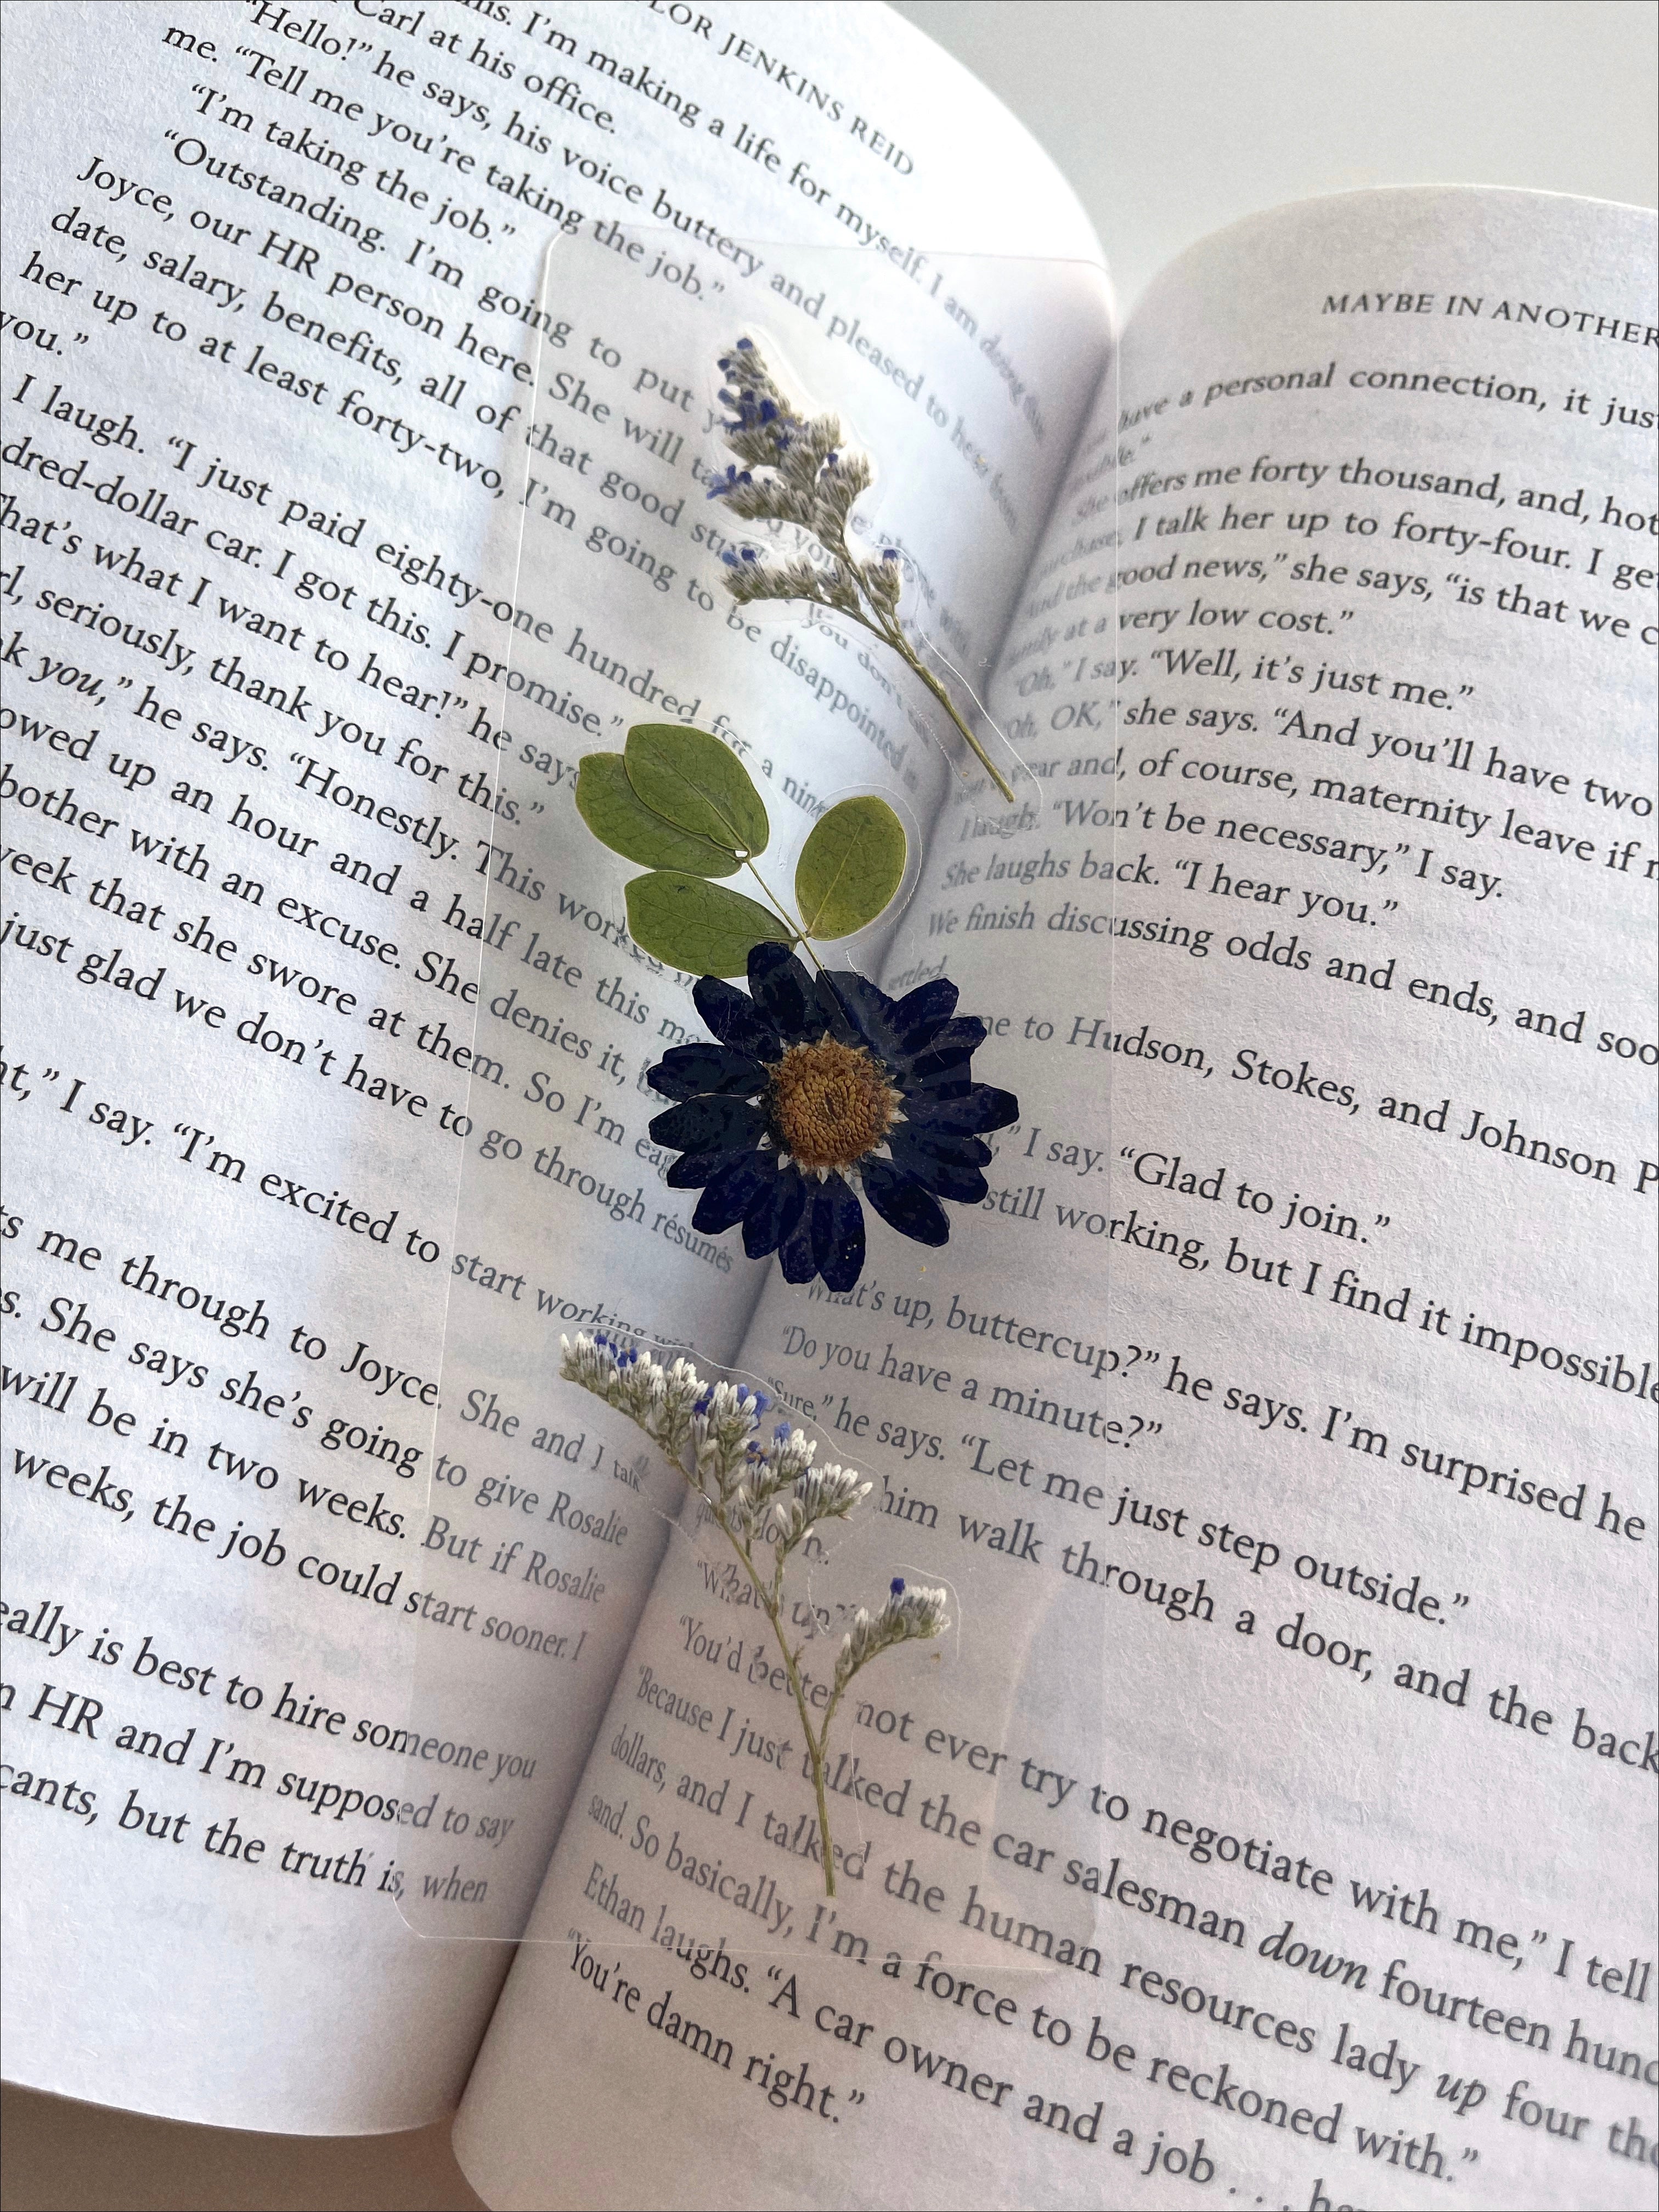 Chin Up, Buttercup - Bookmark, The Library Store